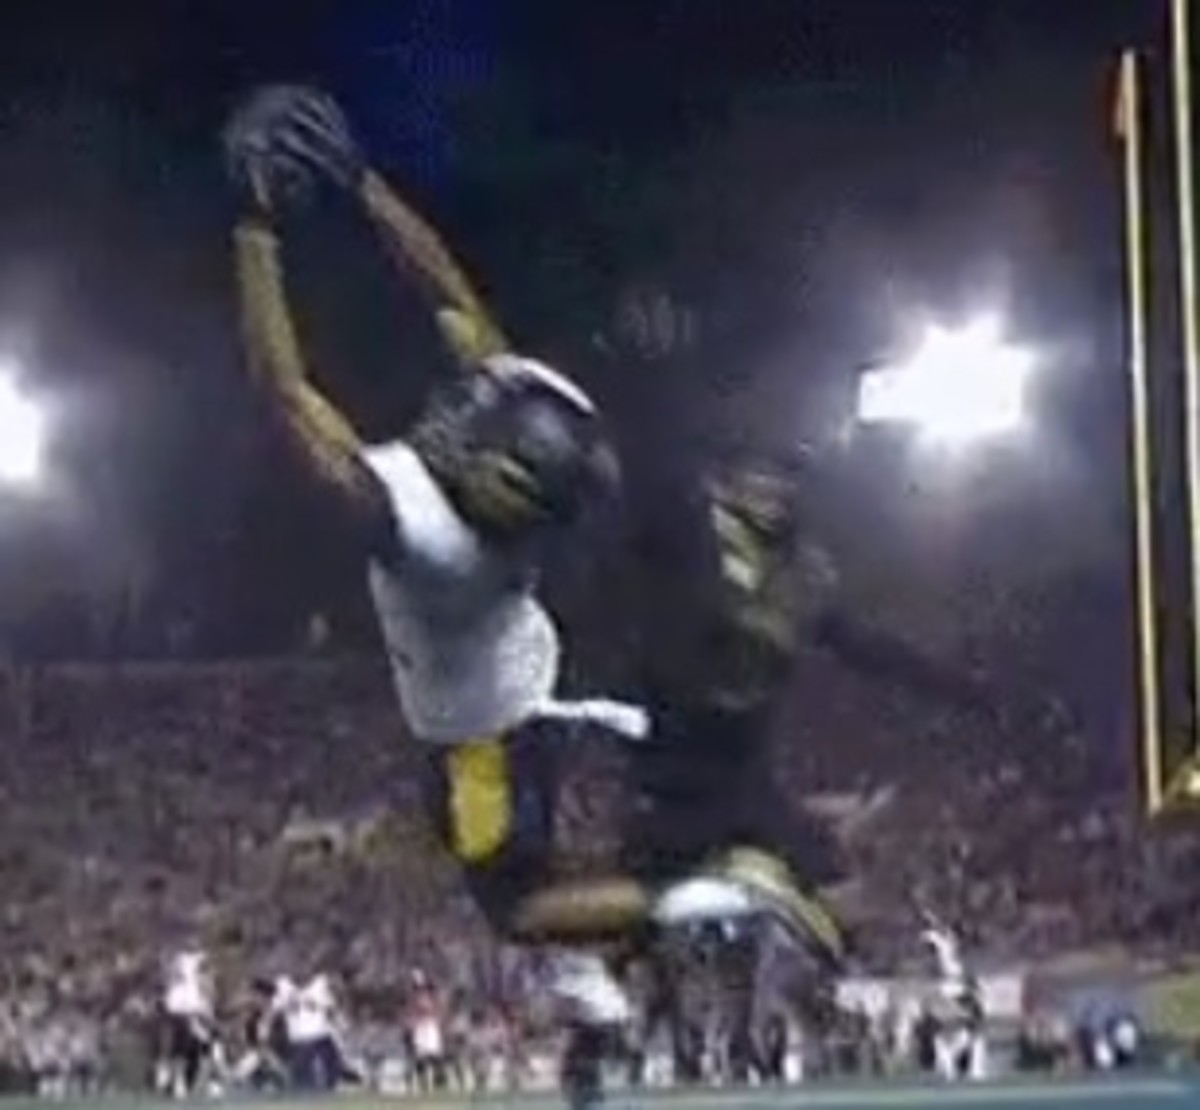 Kenny Lawler makes an amazing catch.